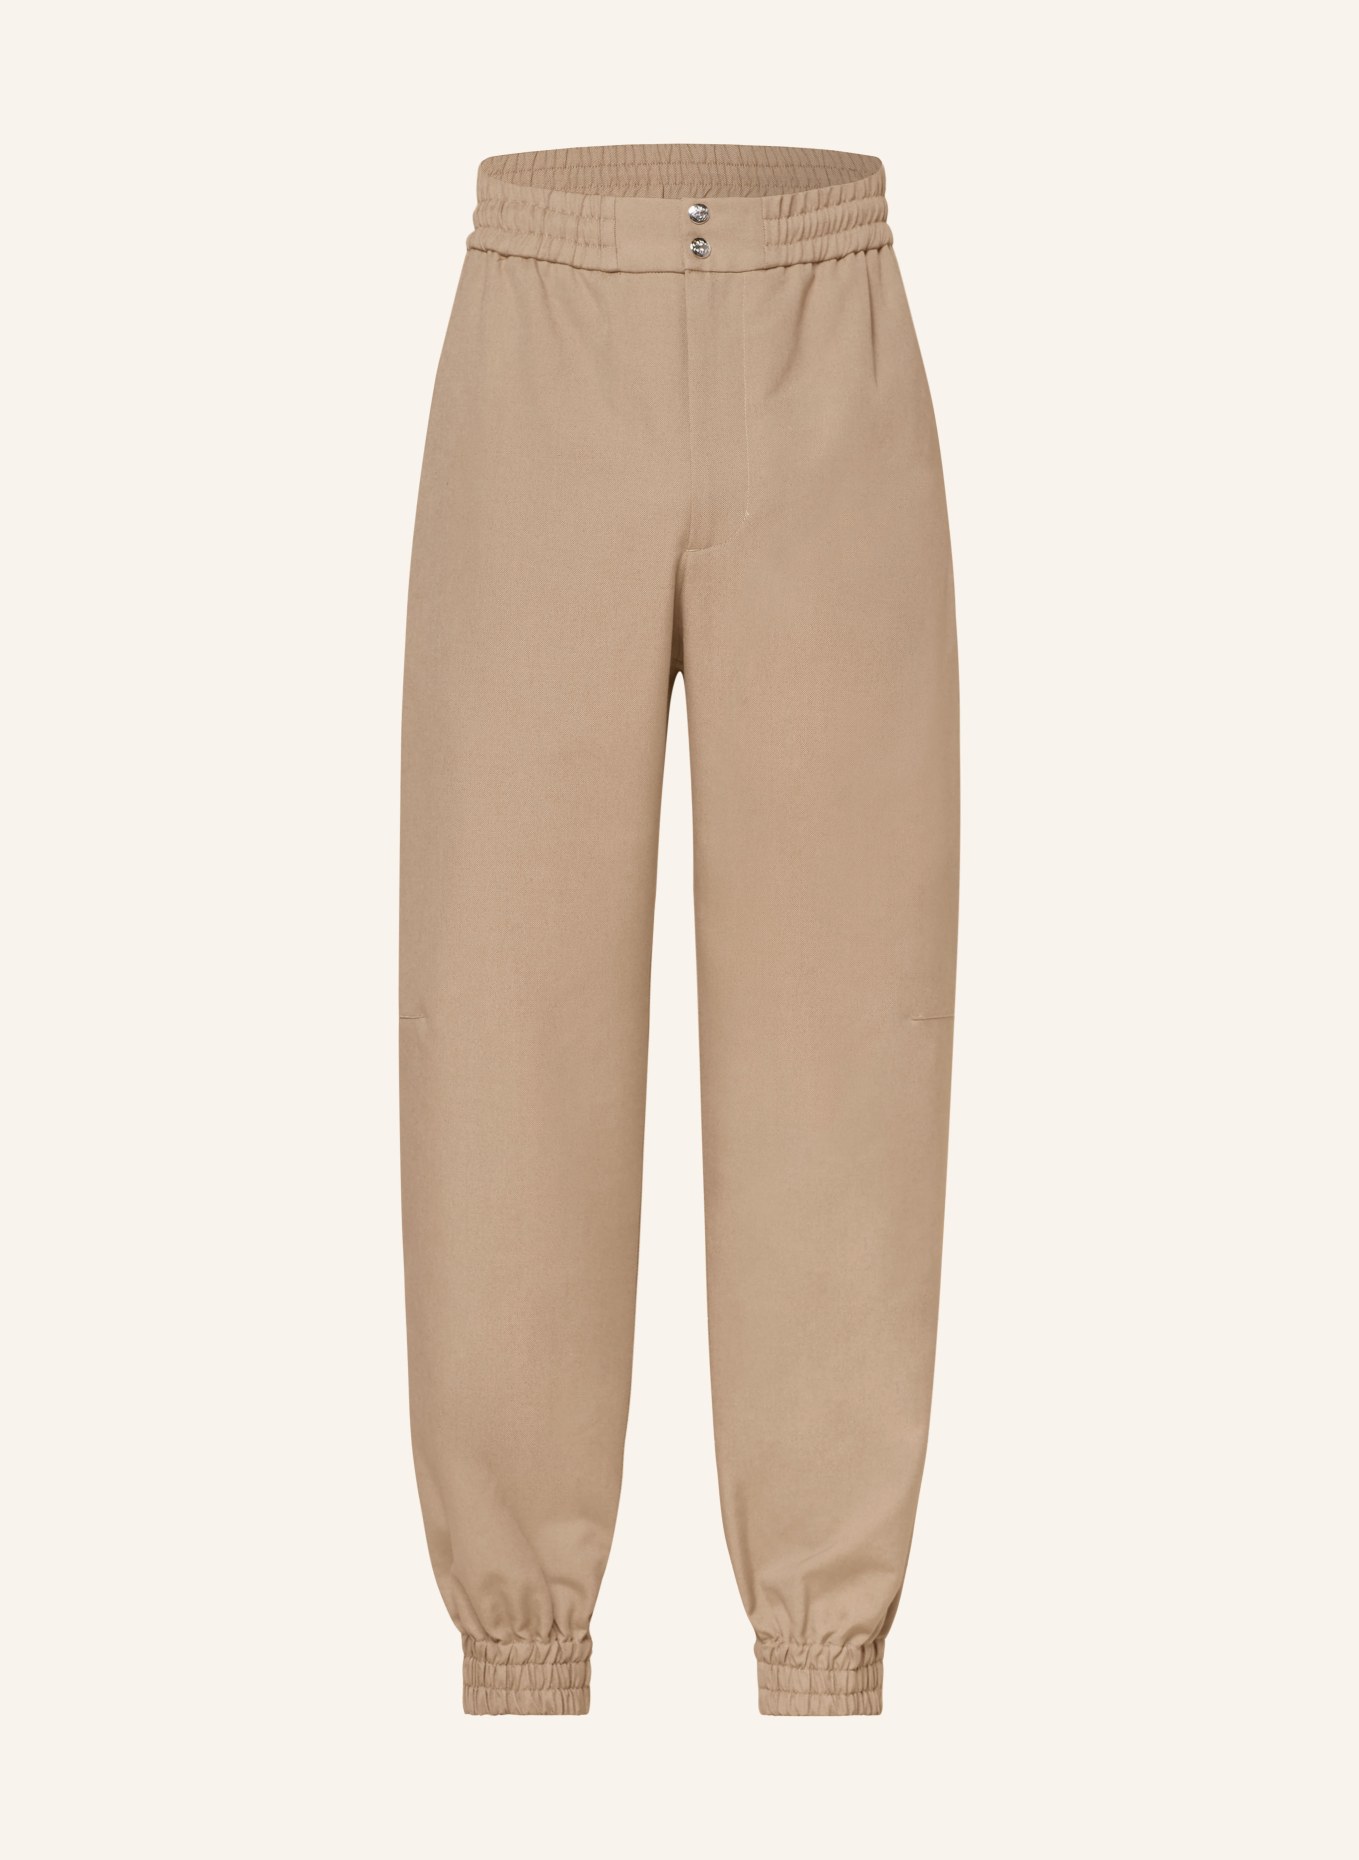 Alexander McQUEEN Pants in jogger style extra slim fit, Color: BEIGE (Image 1)